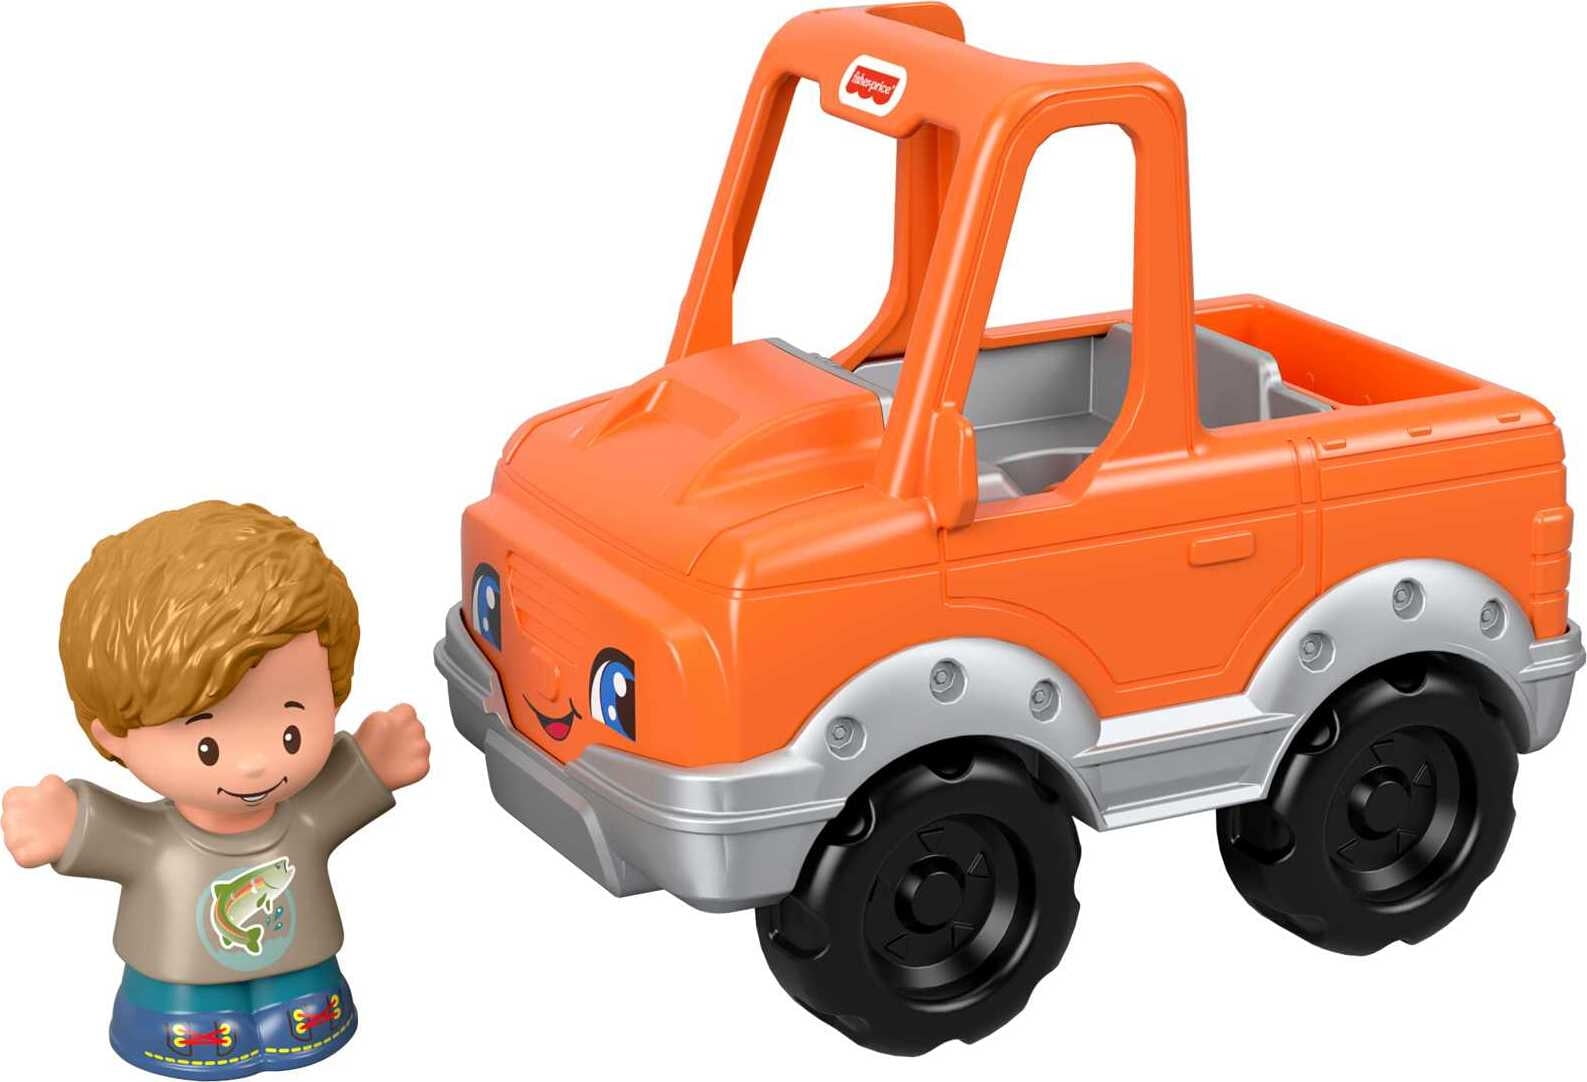 Fisher-Price Little People Help A Friend Pick Up Truck Toddler Toy Orange Vehicle & Figure